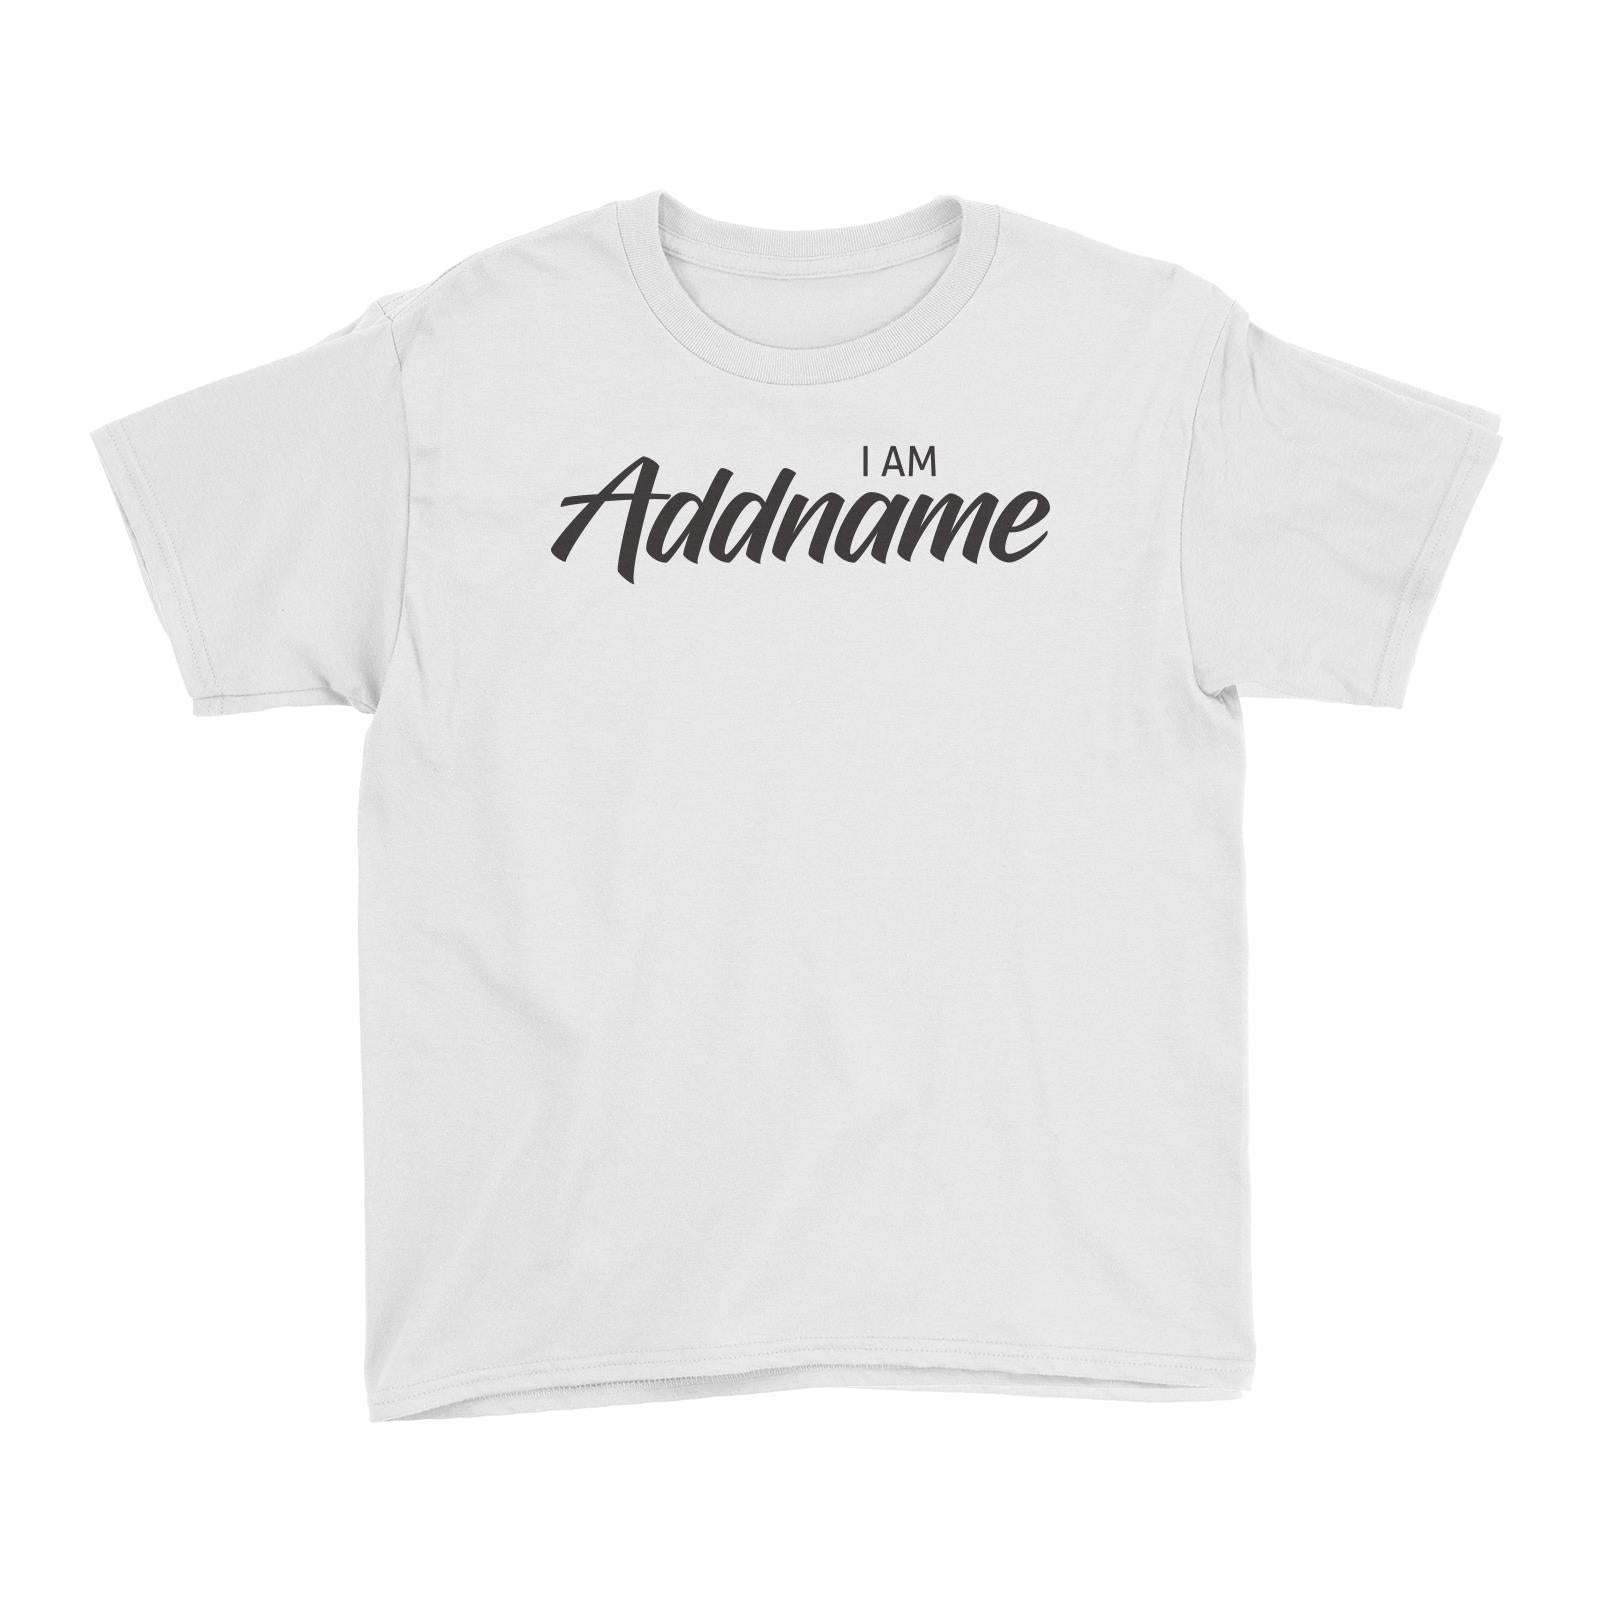 I am Addname Simple Kid's T-Shirt Age Personalizable Designs Matching Family